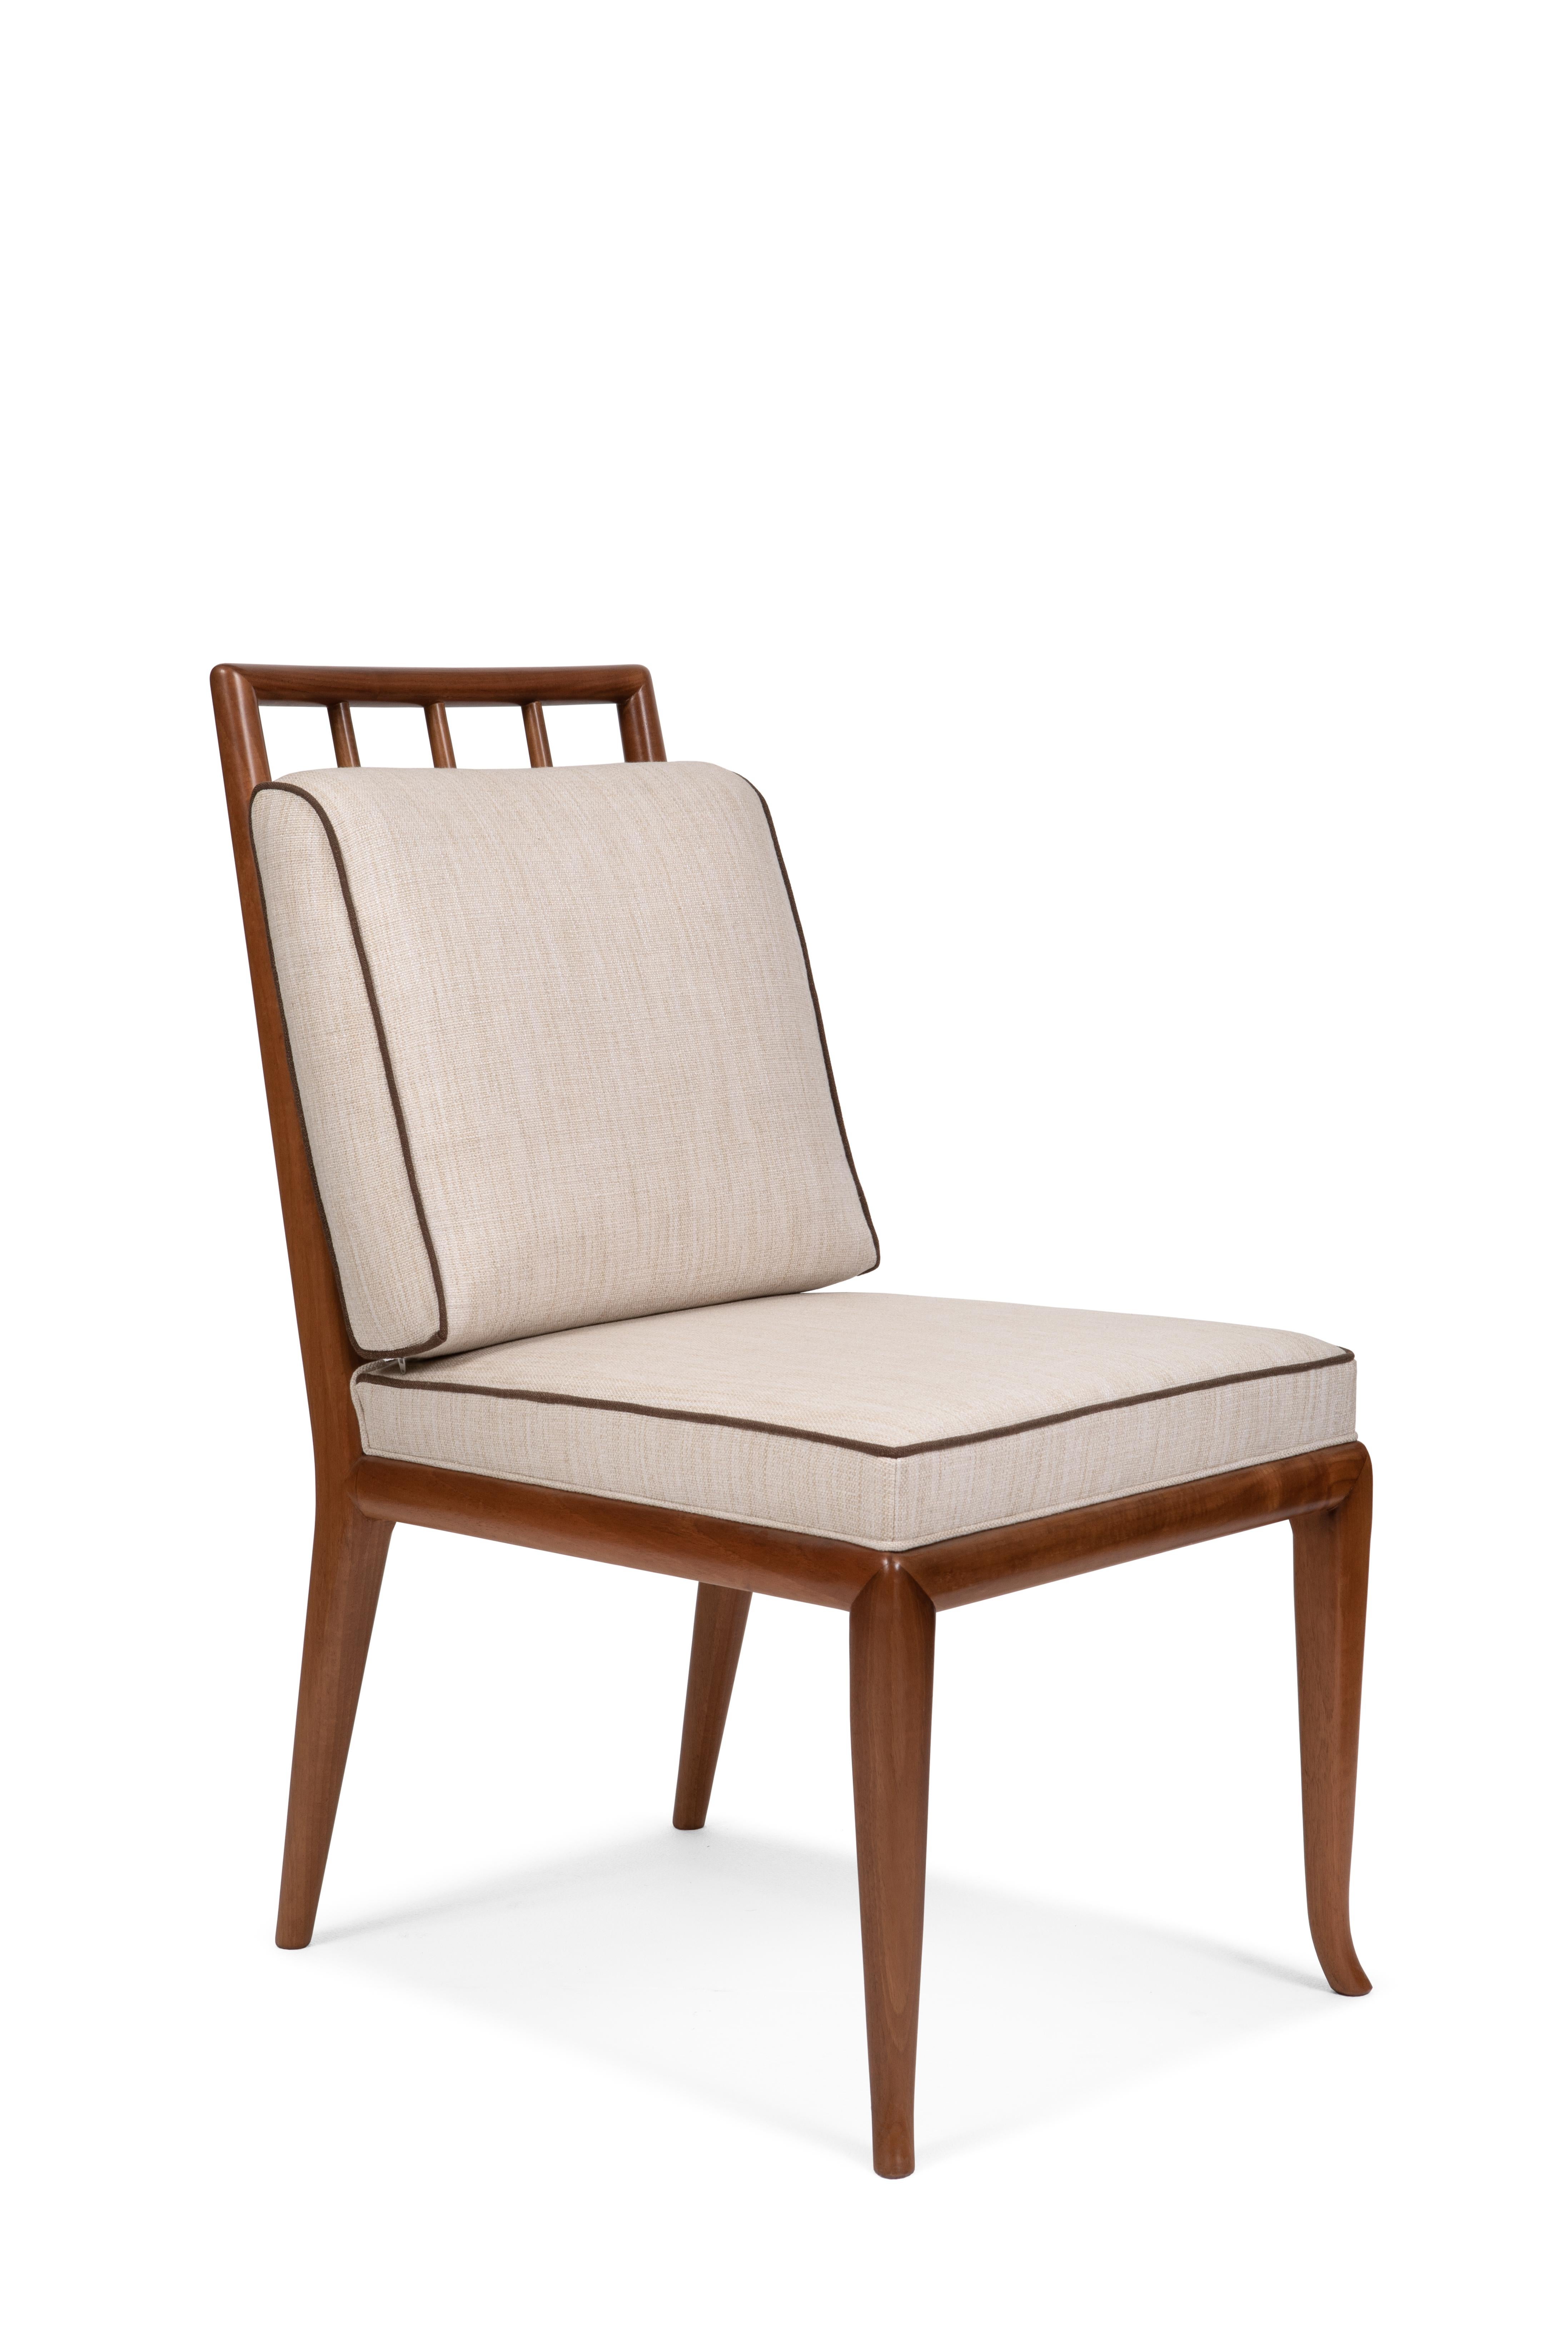 Dining chair with in contemporary style. Simple and elegant line designed for dining room. Walnut wood frame natural color polished.
Stuffed seat, wood back with pillow for backrest. It's possible to upholster with different color piping ( as